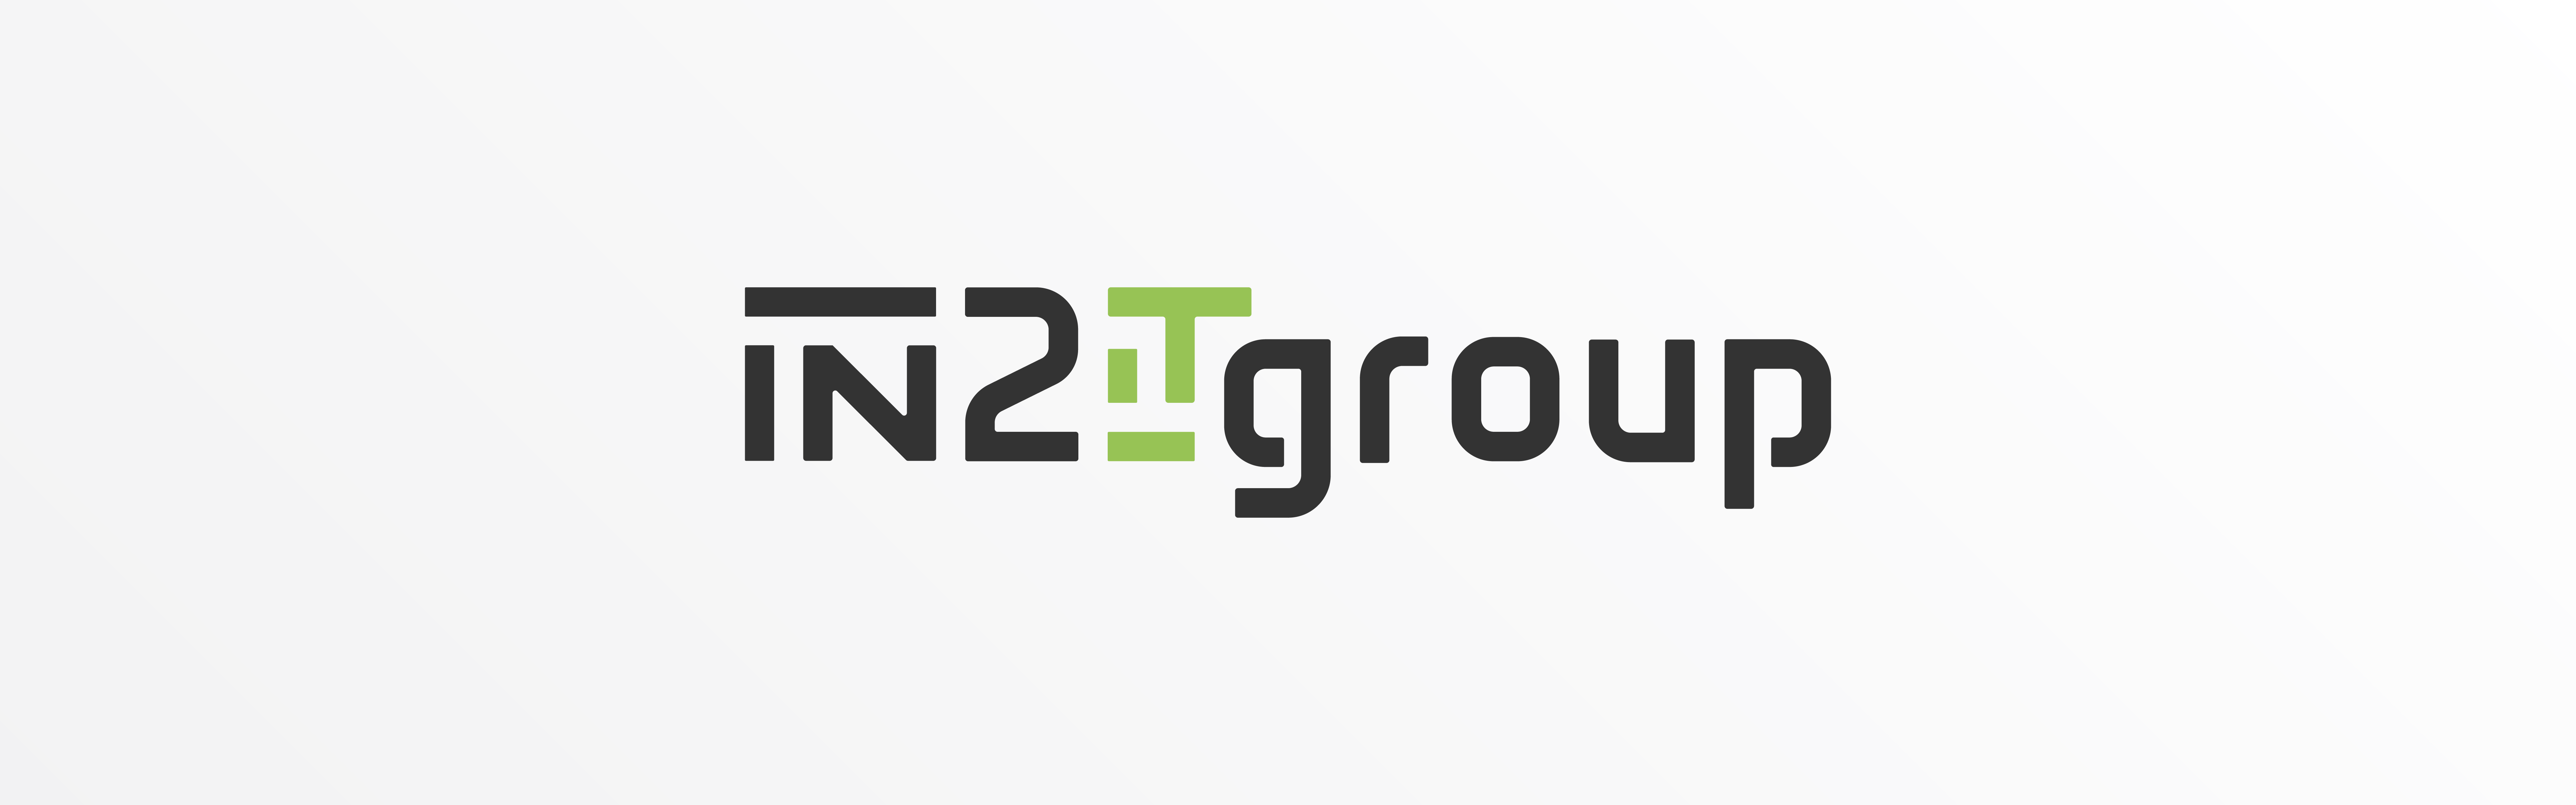 Logo of IN2IT Group on a white background.